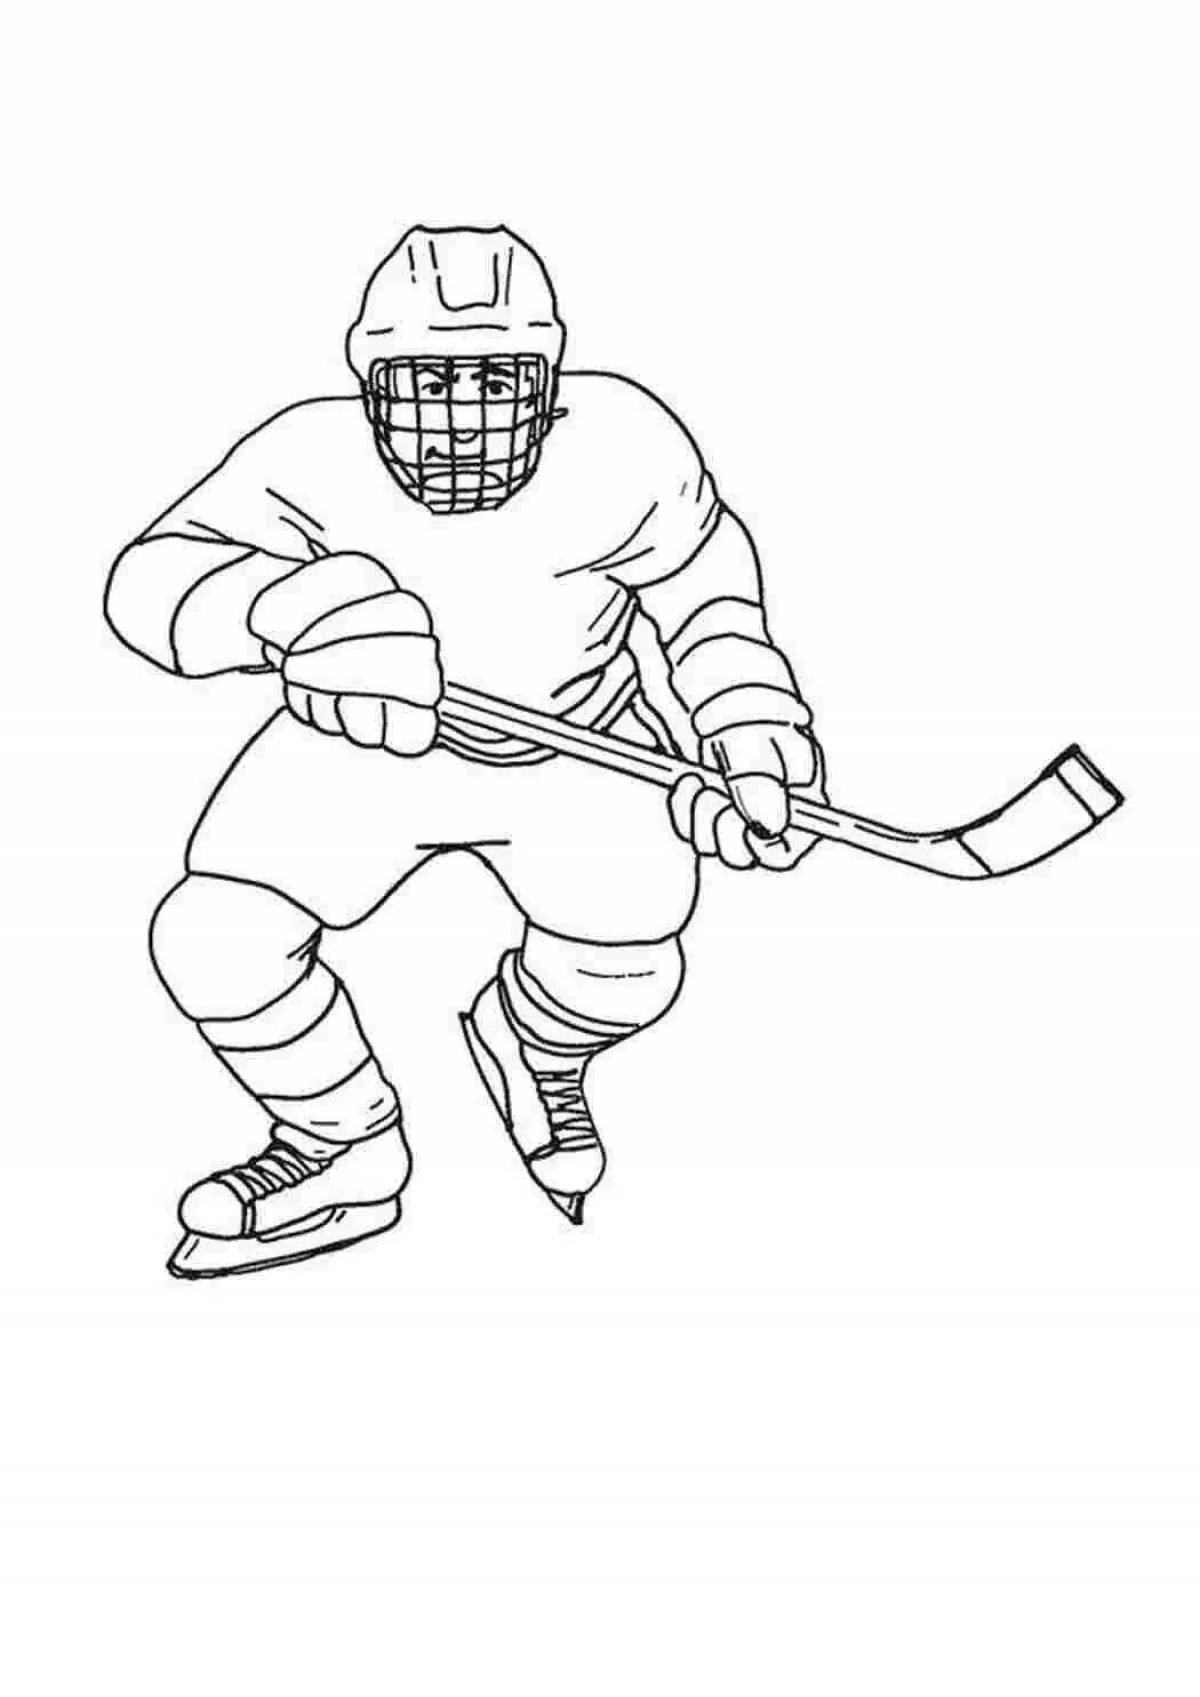 Intriguing hockey coloring book for boys